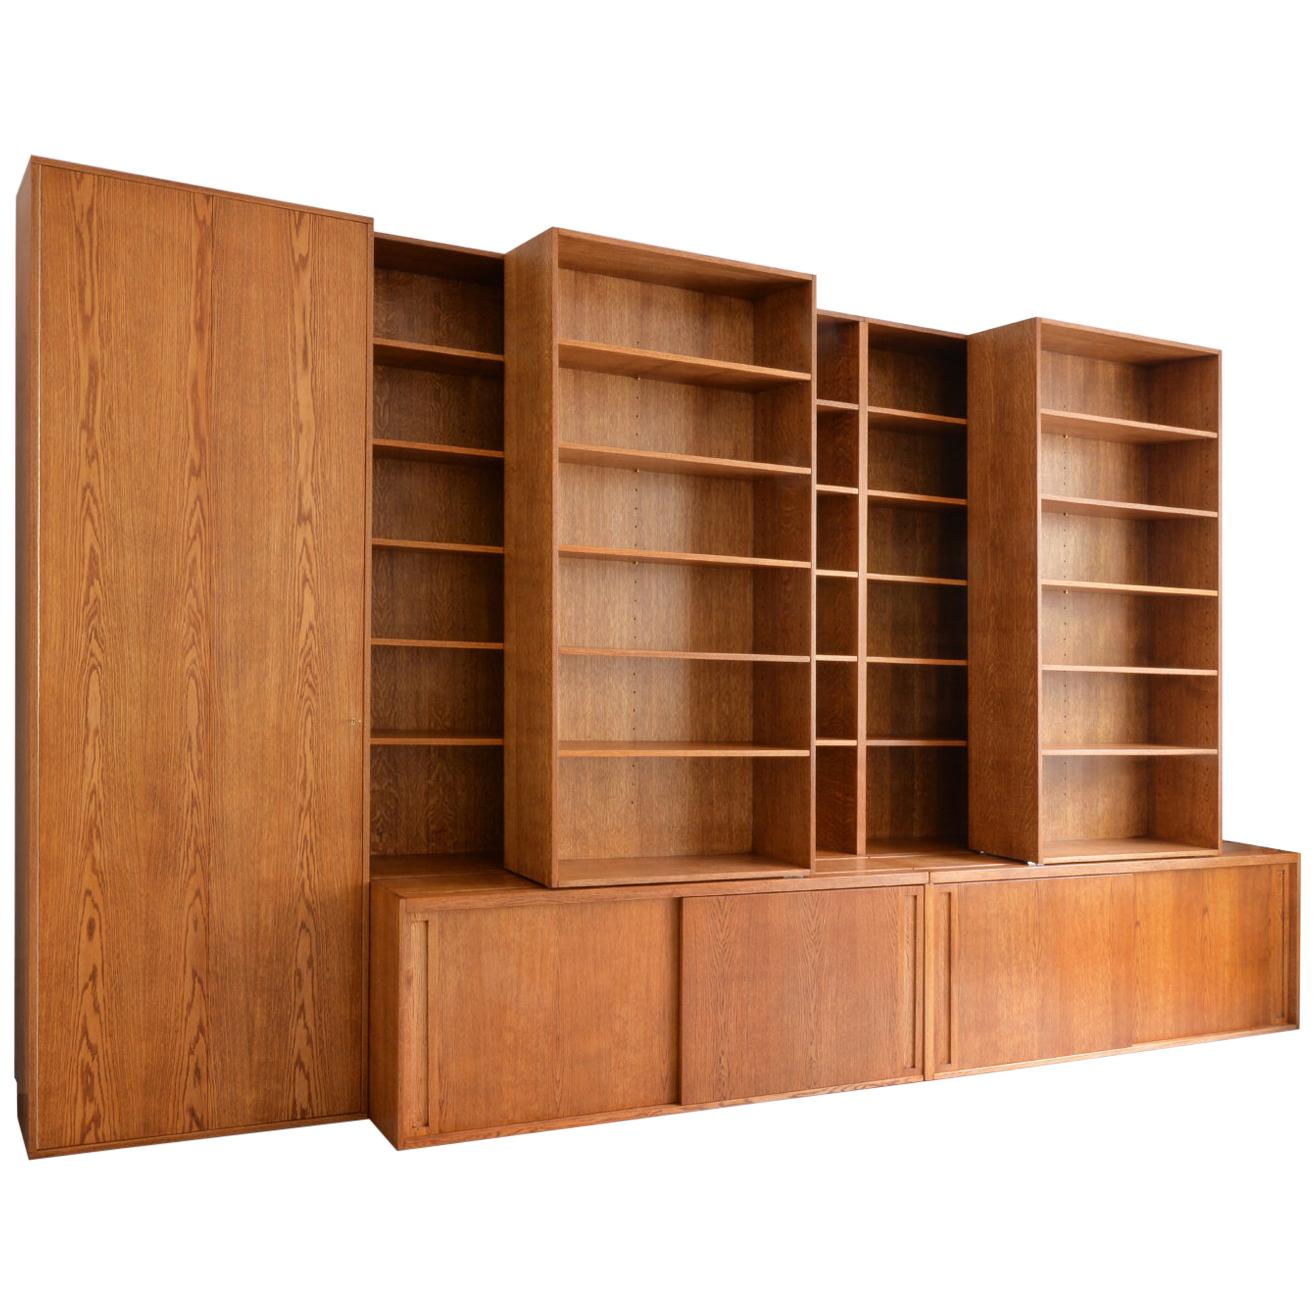 GMD Berlin Bookcases